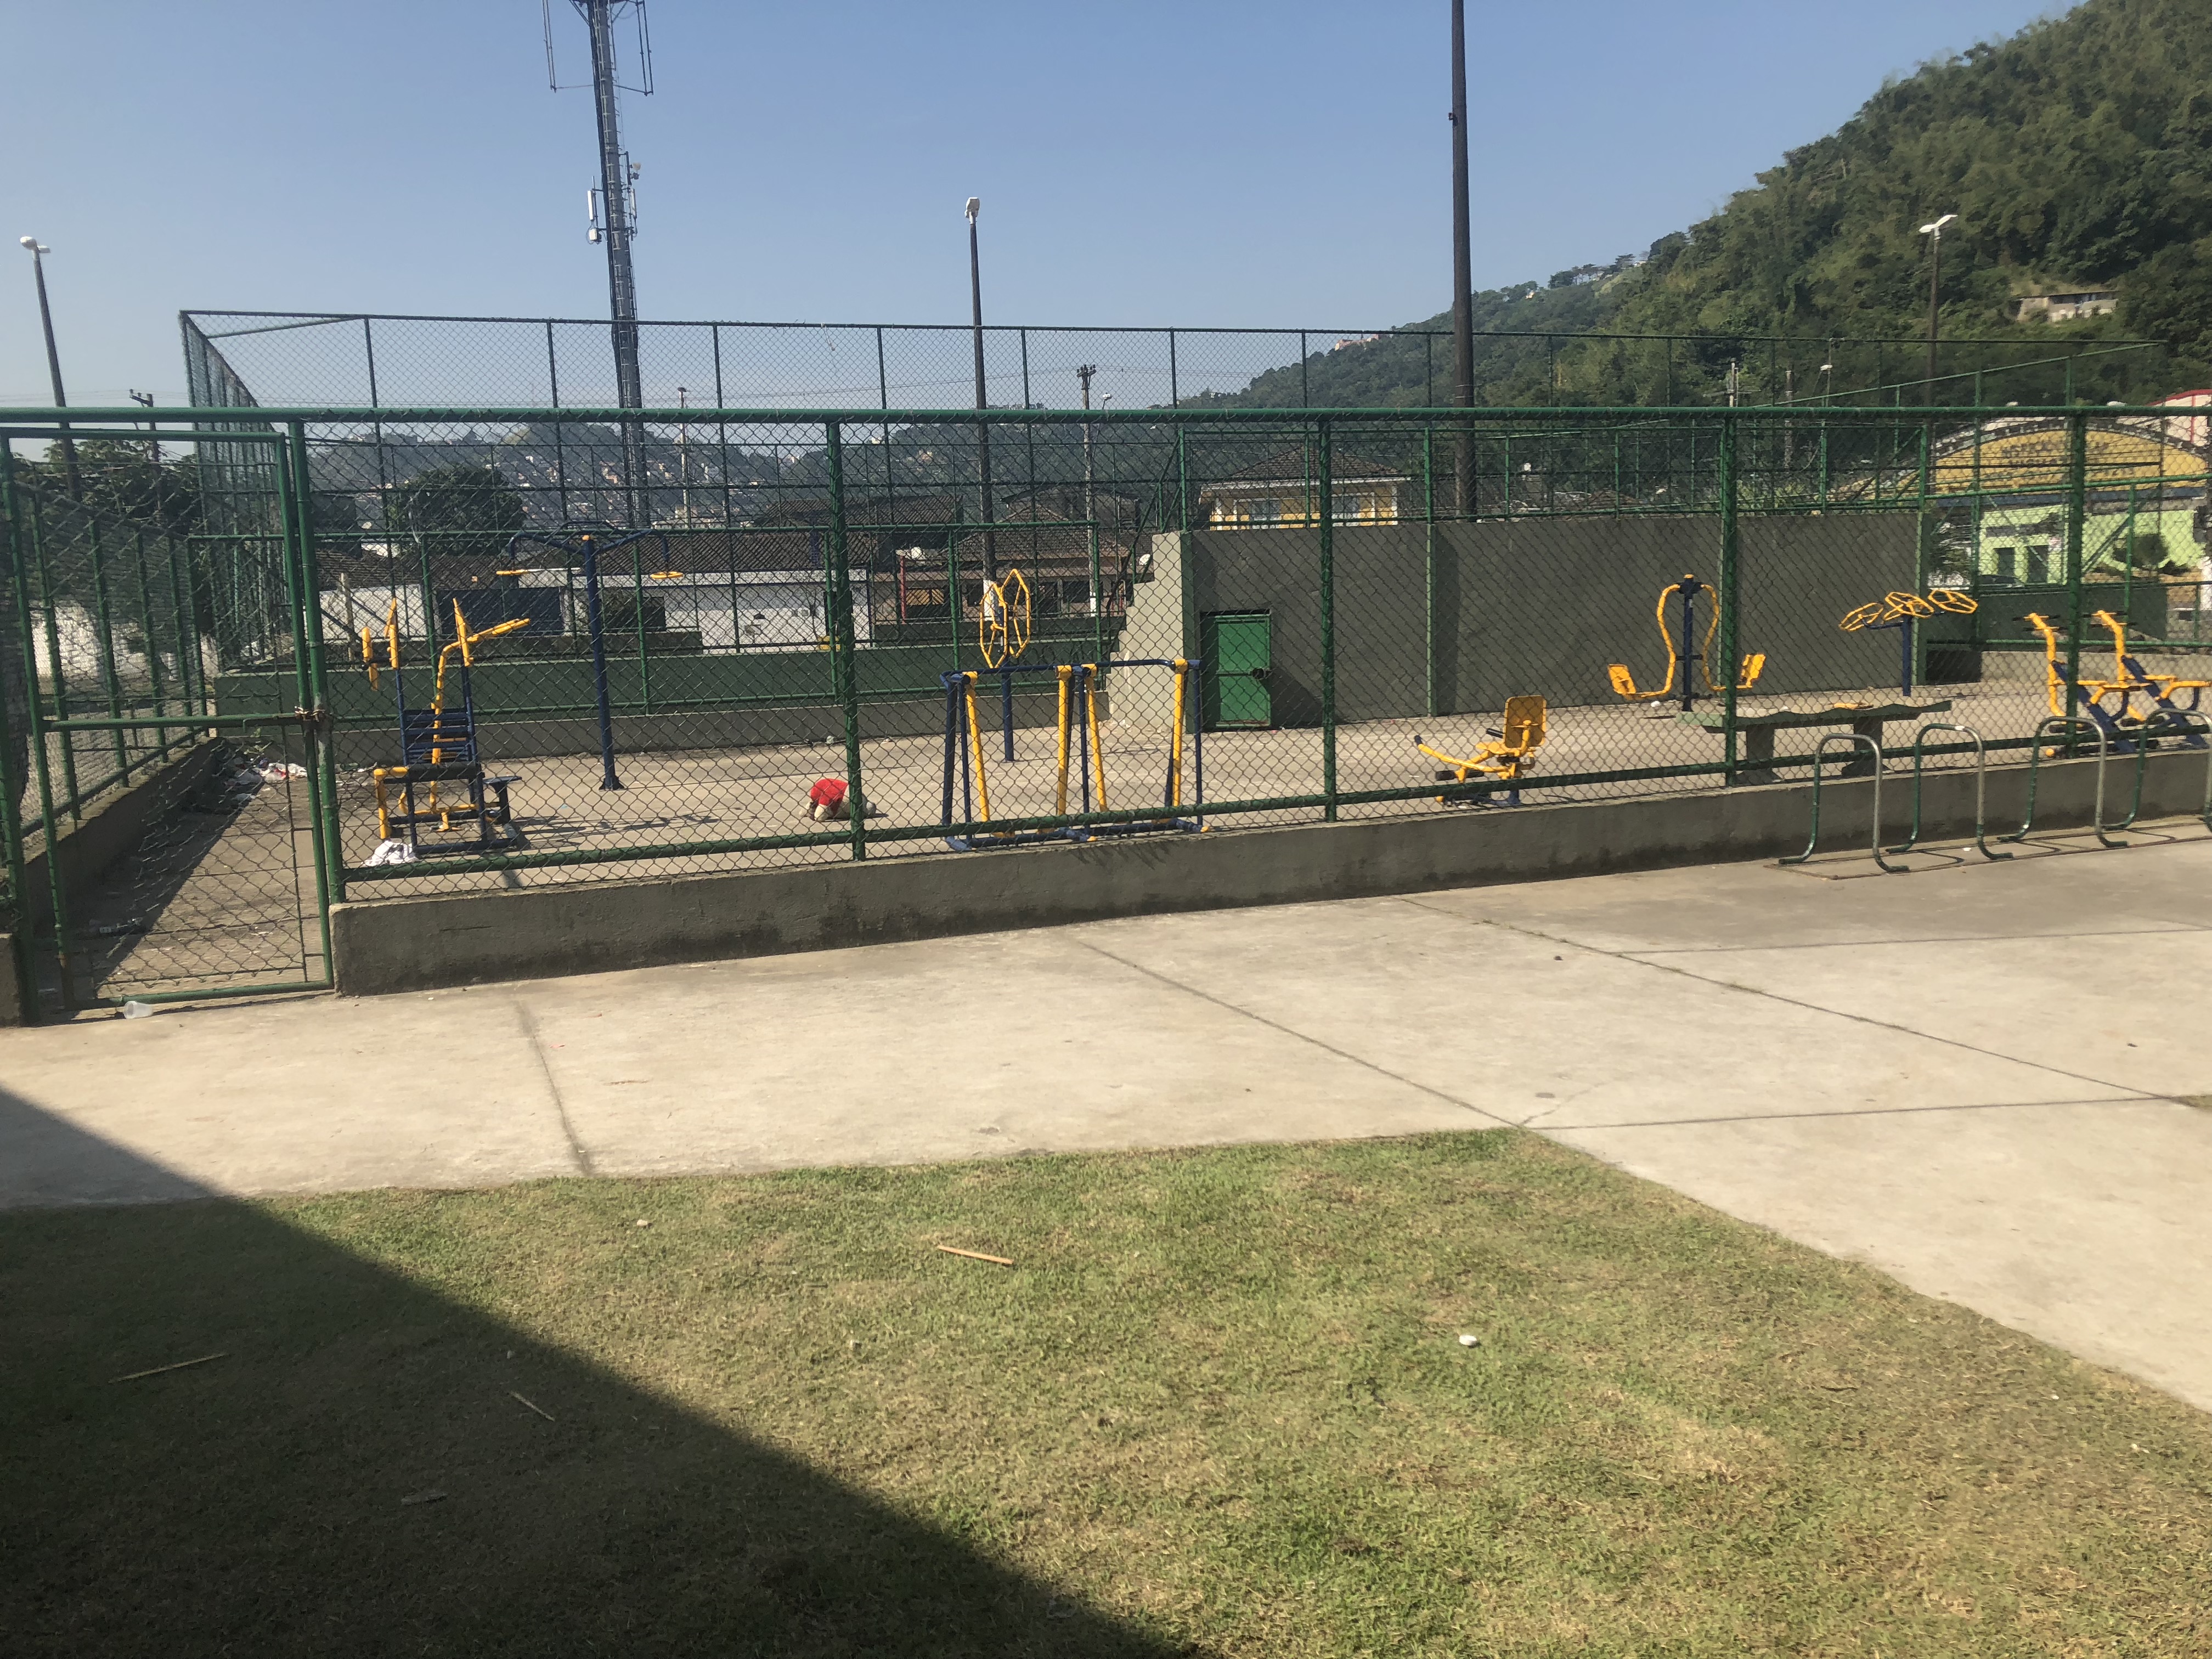 FSD-Brazil is interested in working with local government to refurbish the Soccer Sport Center which is currently abandoned and once served  over 1,000 children in the local community.